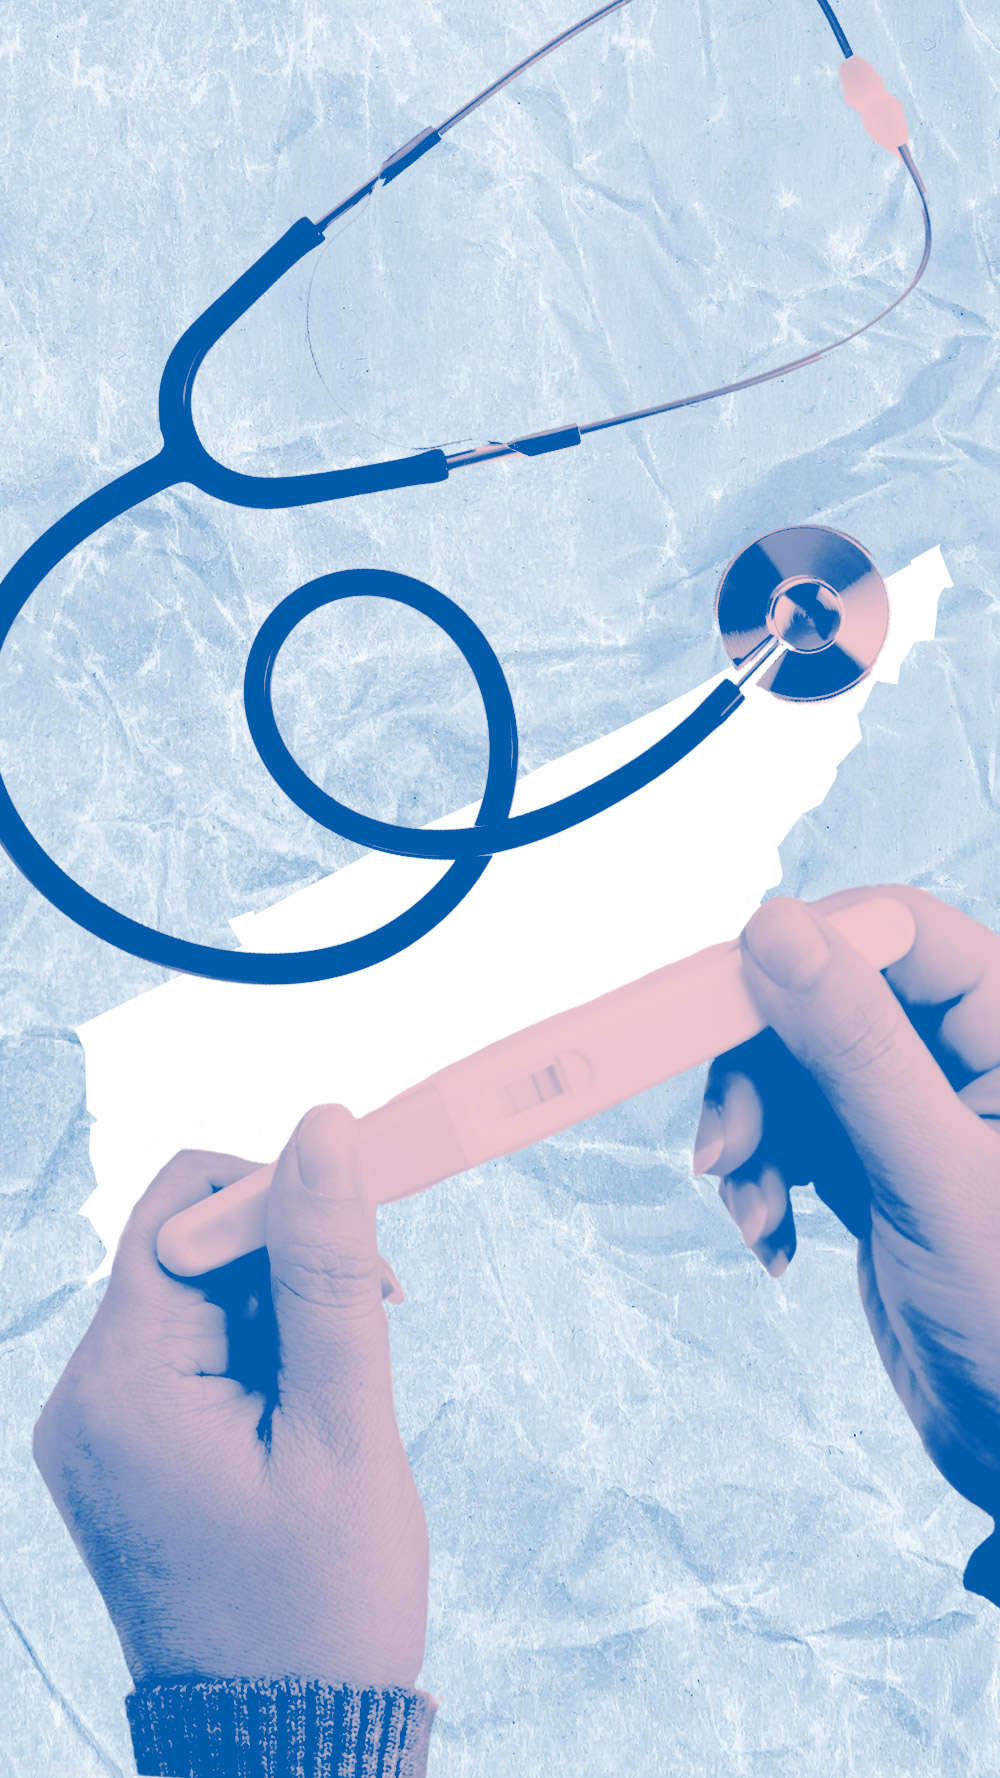 Graphic of a stethoscope and a person holding a pregnancy test.